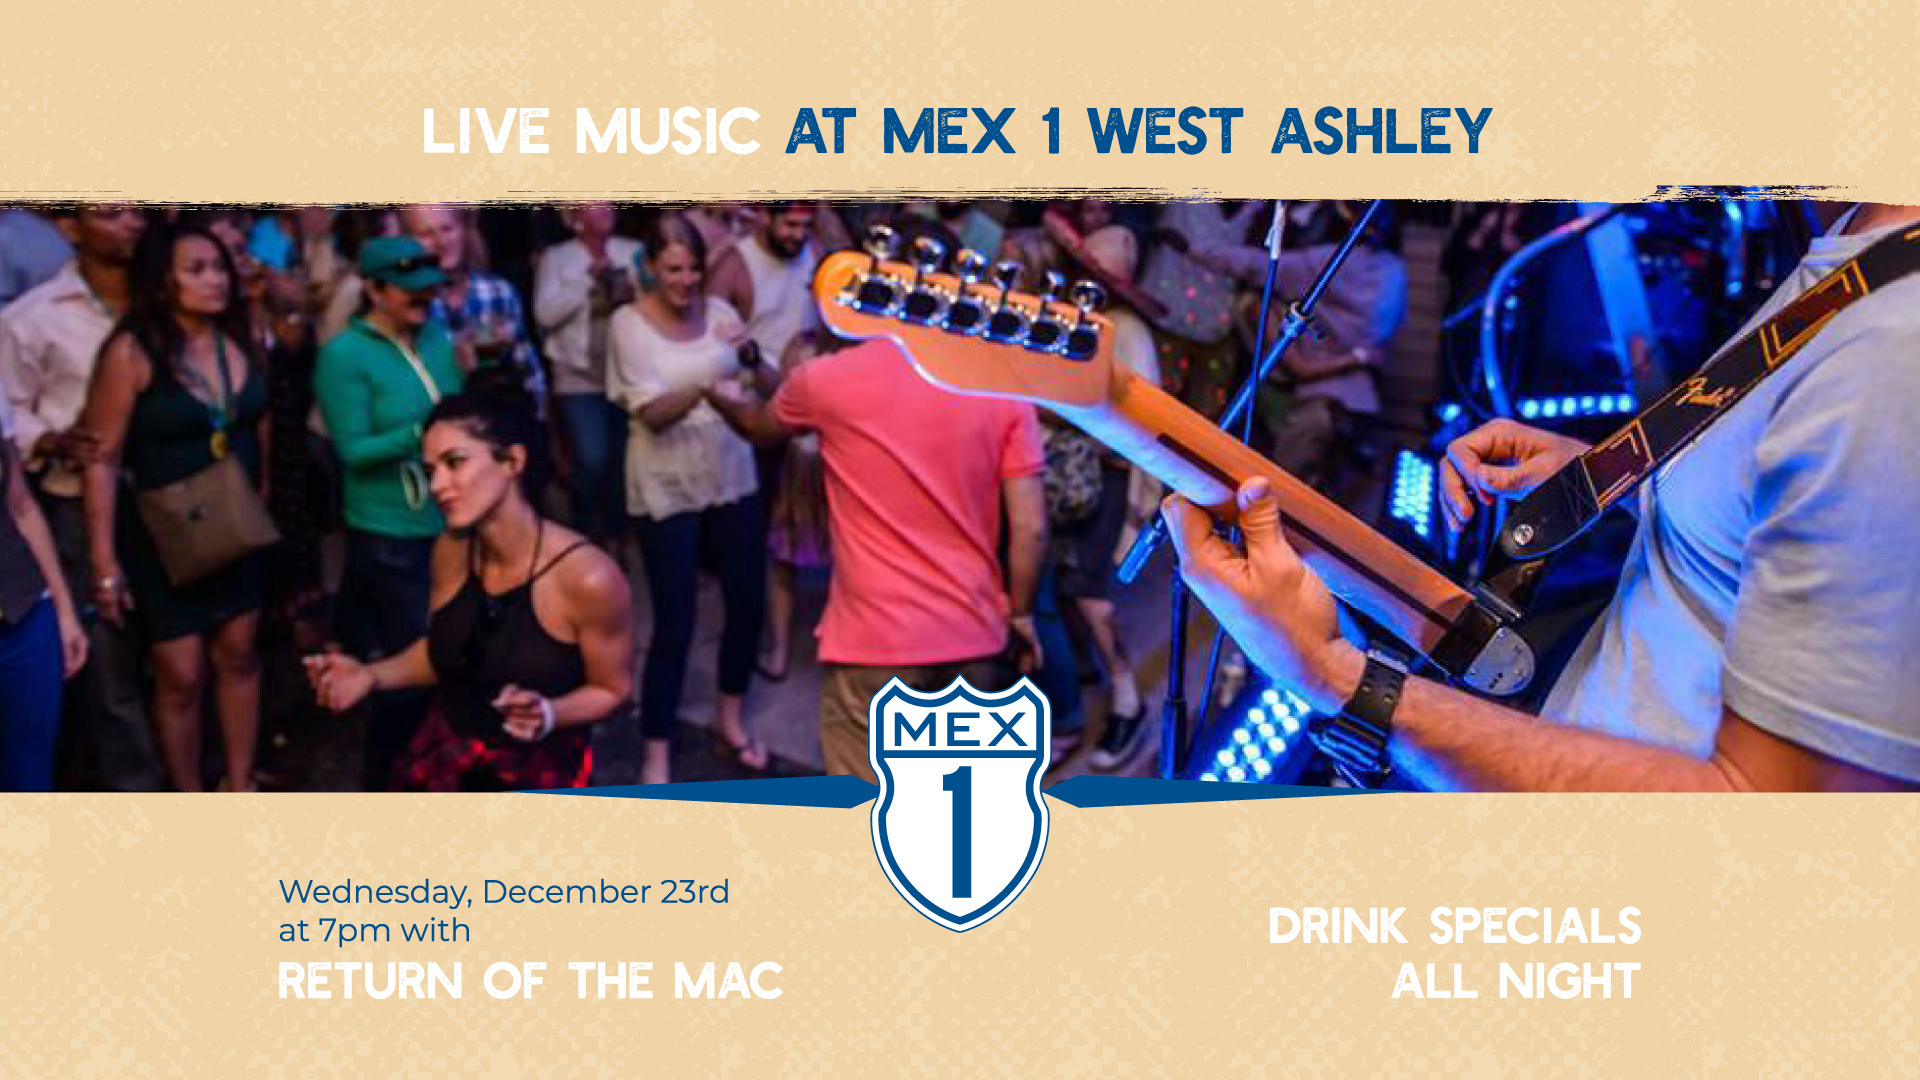 Live Music with Return of the Mac at Mex 1 West Ashley